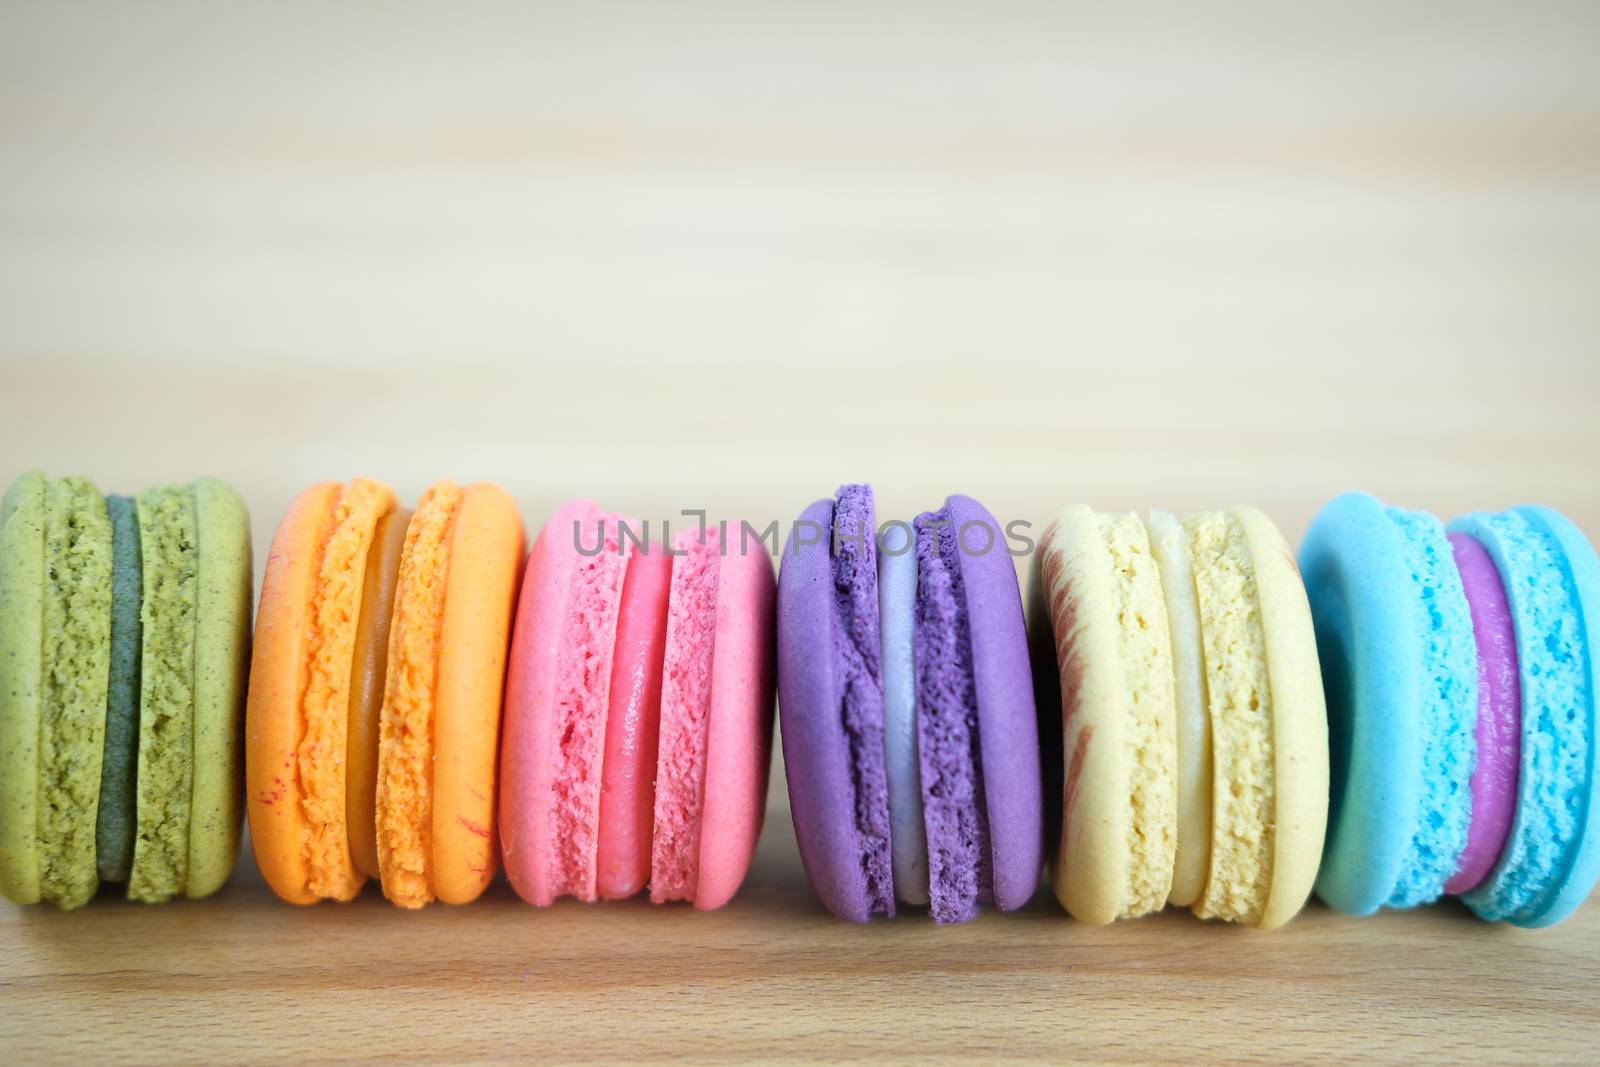 Sweet and colorful, Different kinds of macaroons in stack on light wooden background with blank space,selective focus, Dessert.